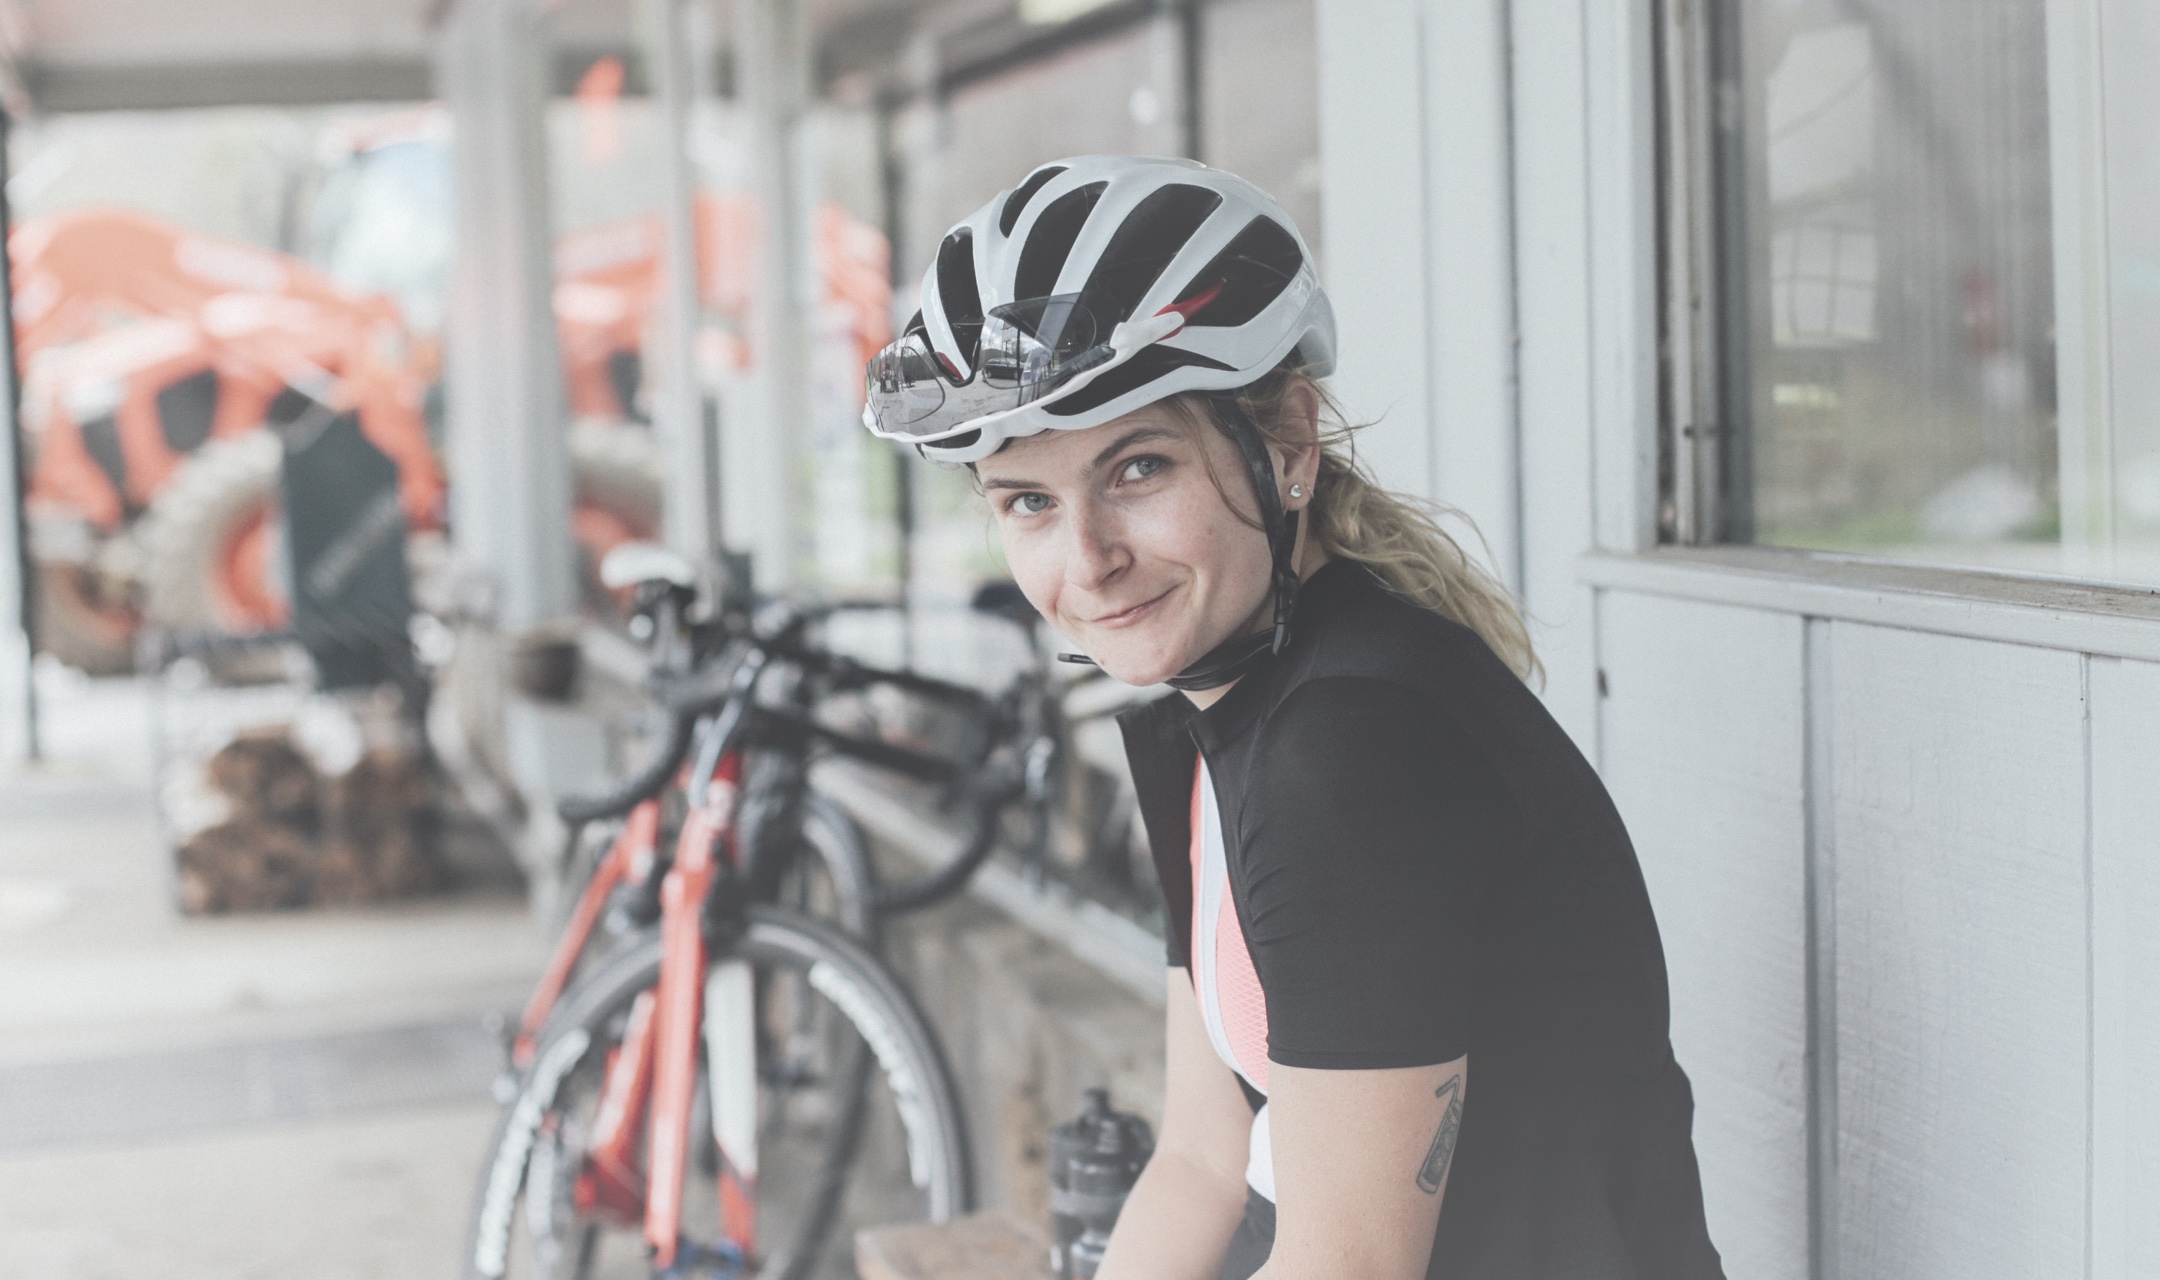 With cycle insurance from Sundays, you not only get comprehensive bike insurance but, you can also specify your cycling gear and accessories, including your helmet, up to a value of £10 000.